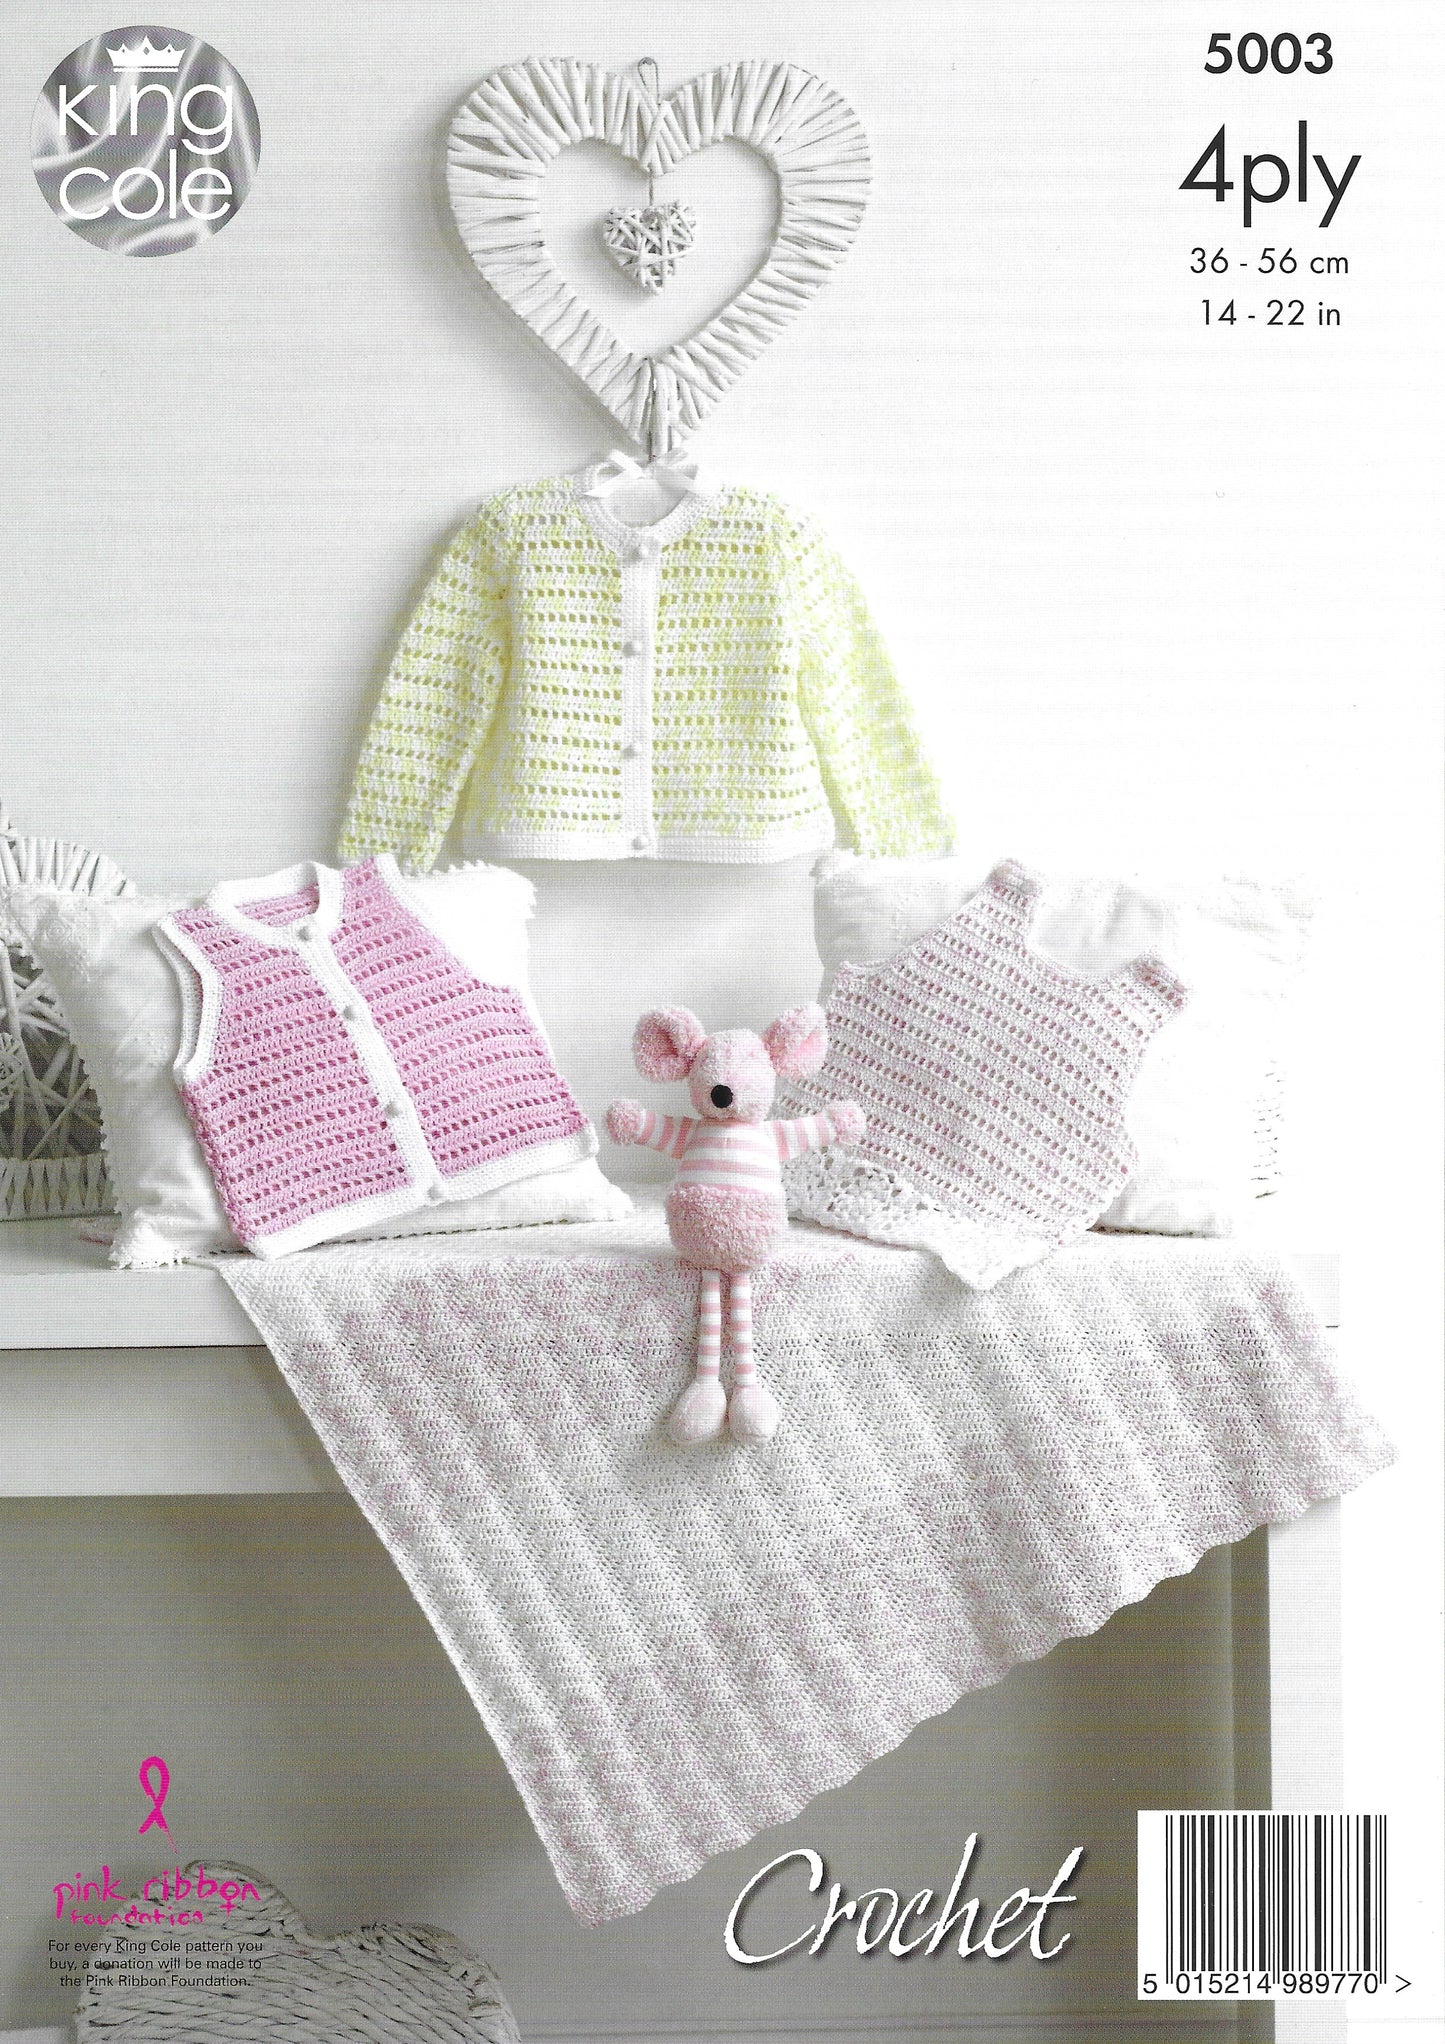 King Cole 5003 Pinafore Dress, Sweater, Cardigan, Waistcoat and Blanket 4ply Crochet Pattern